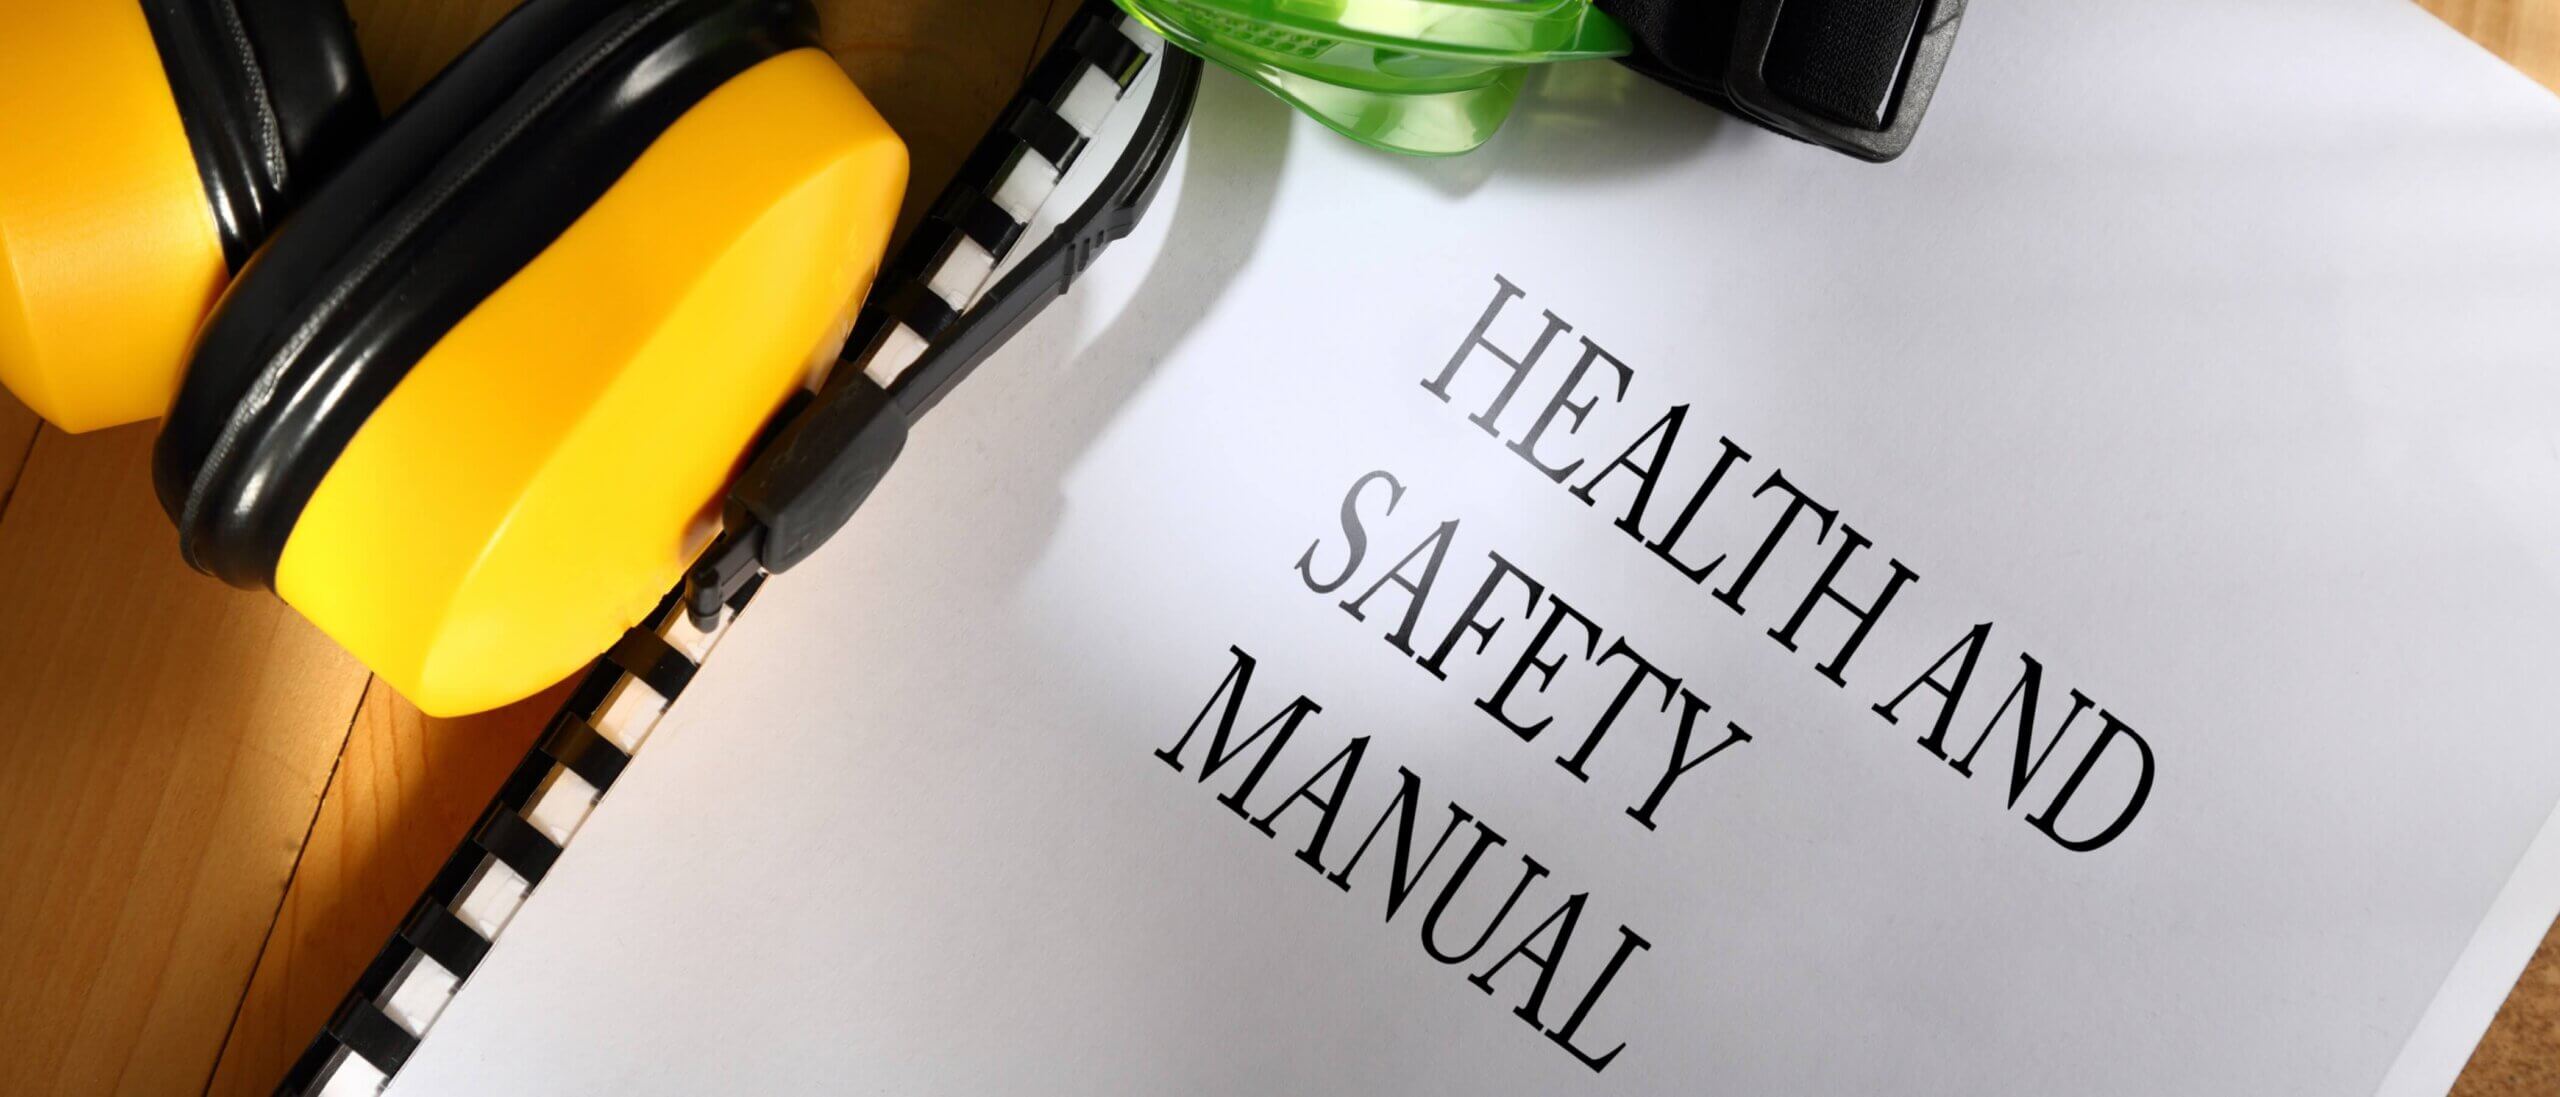 Health and safety manual